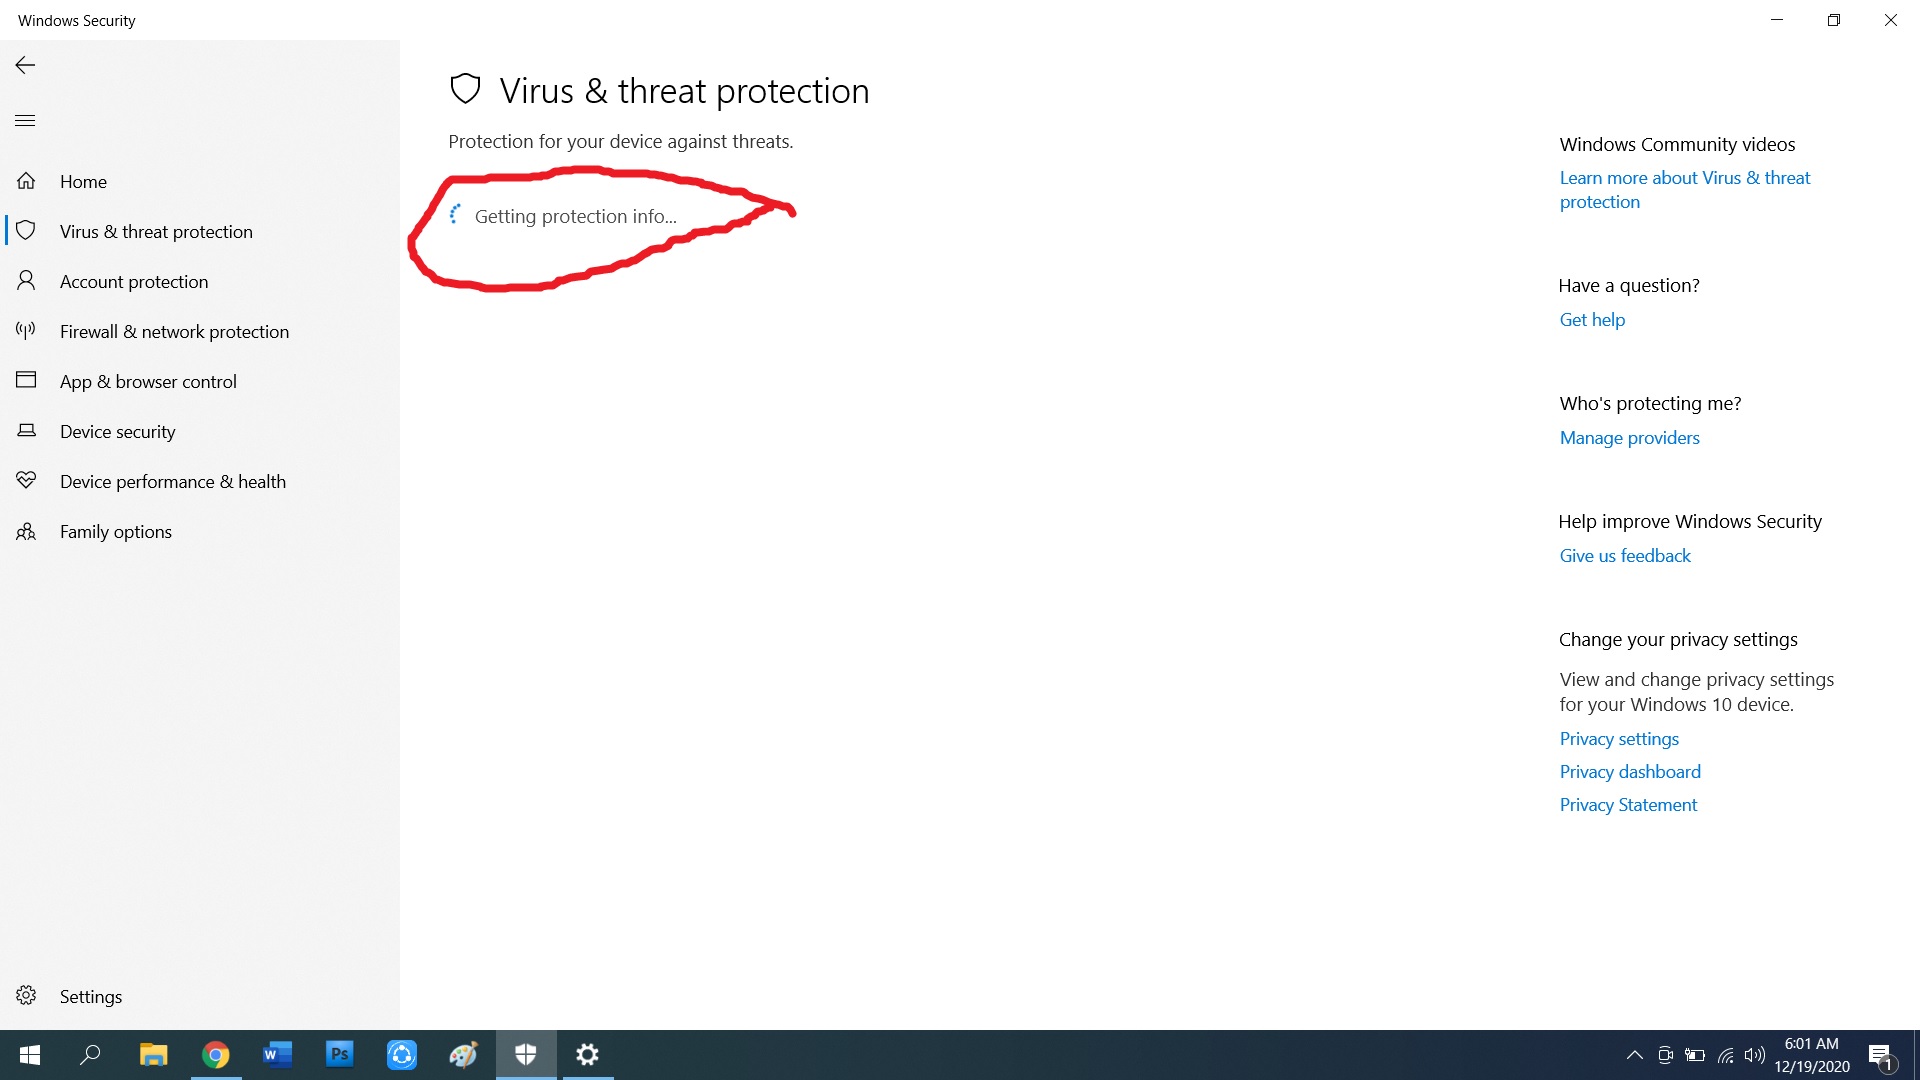 Windows Security's Virus & threat protection is stuck in "getting protection info..." c82a9d1f-4772-43df-8831-5d20ec11d6fd?upload=true.jpg